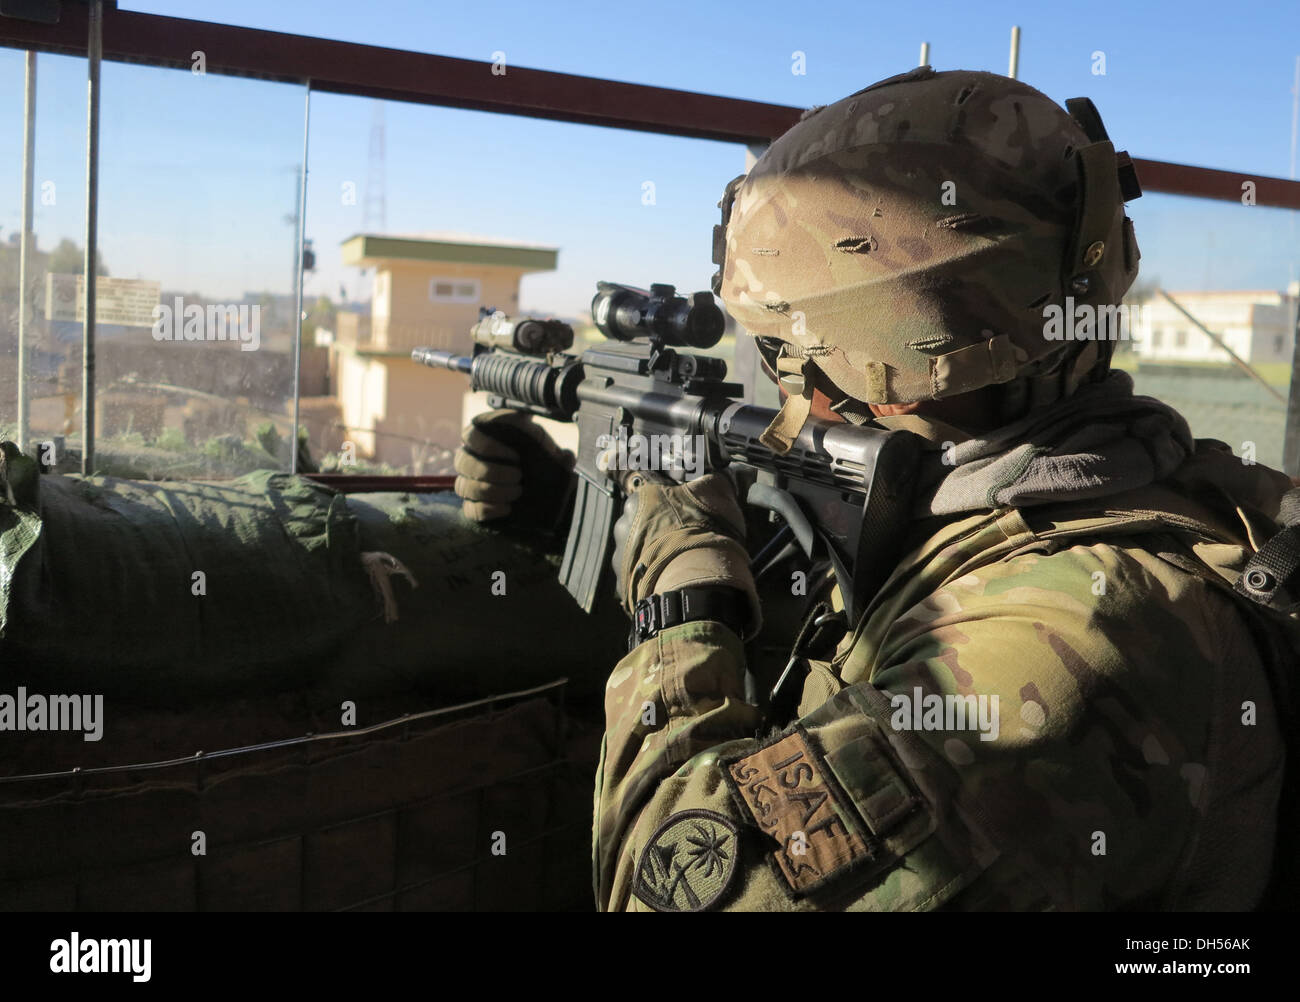 TOWER OF POWER -- Sgt. Albert Samana of Bravo Company, 1st Battalion, 294th Infantry Regiment, Guam Army National Guard, keeps eyes on movement at a Main Operating Base LashKar Gah tower late October in Helmand Province, Afghanistan. Stock Photo